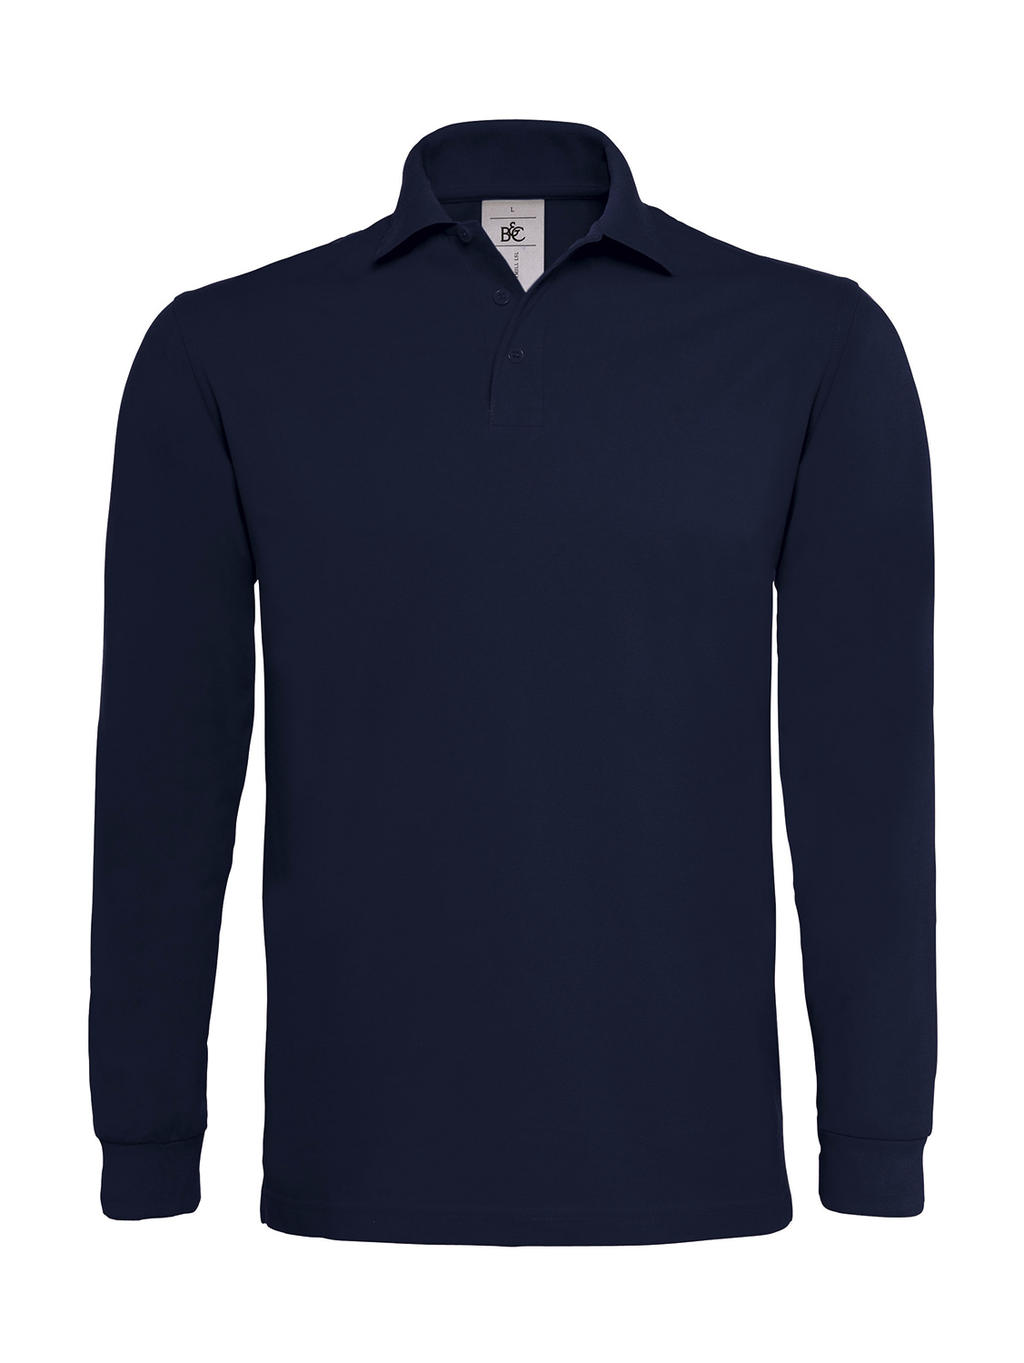  Heavymill LSL Polo in Farbe Navy